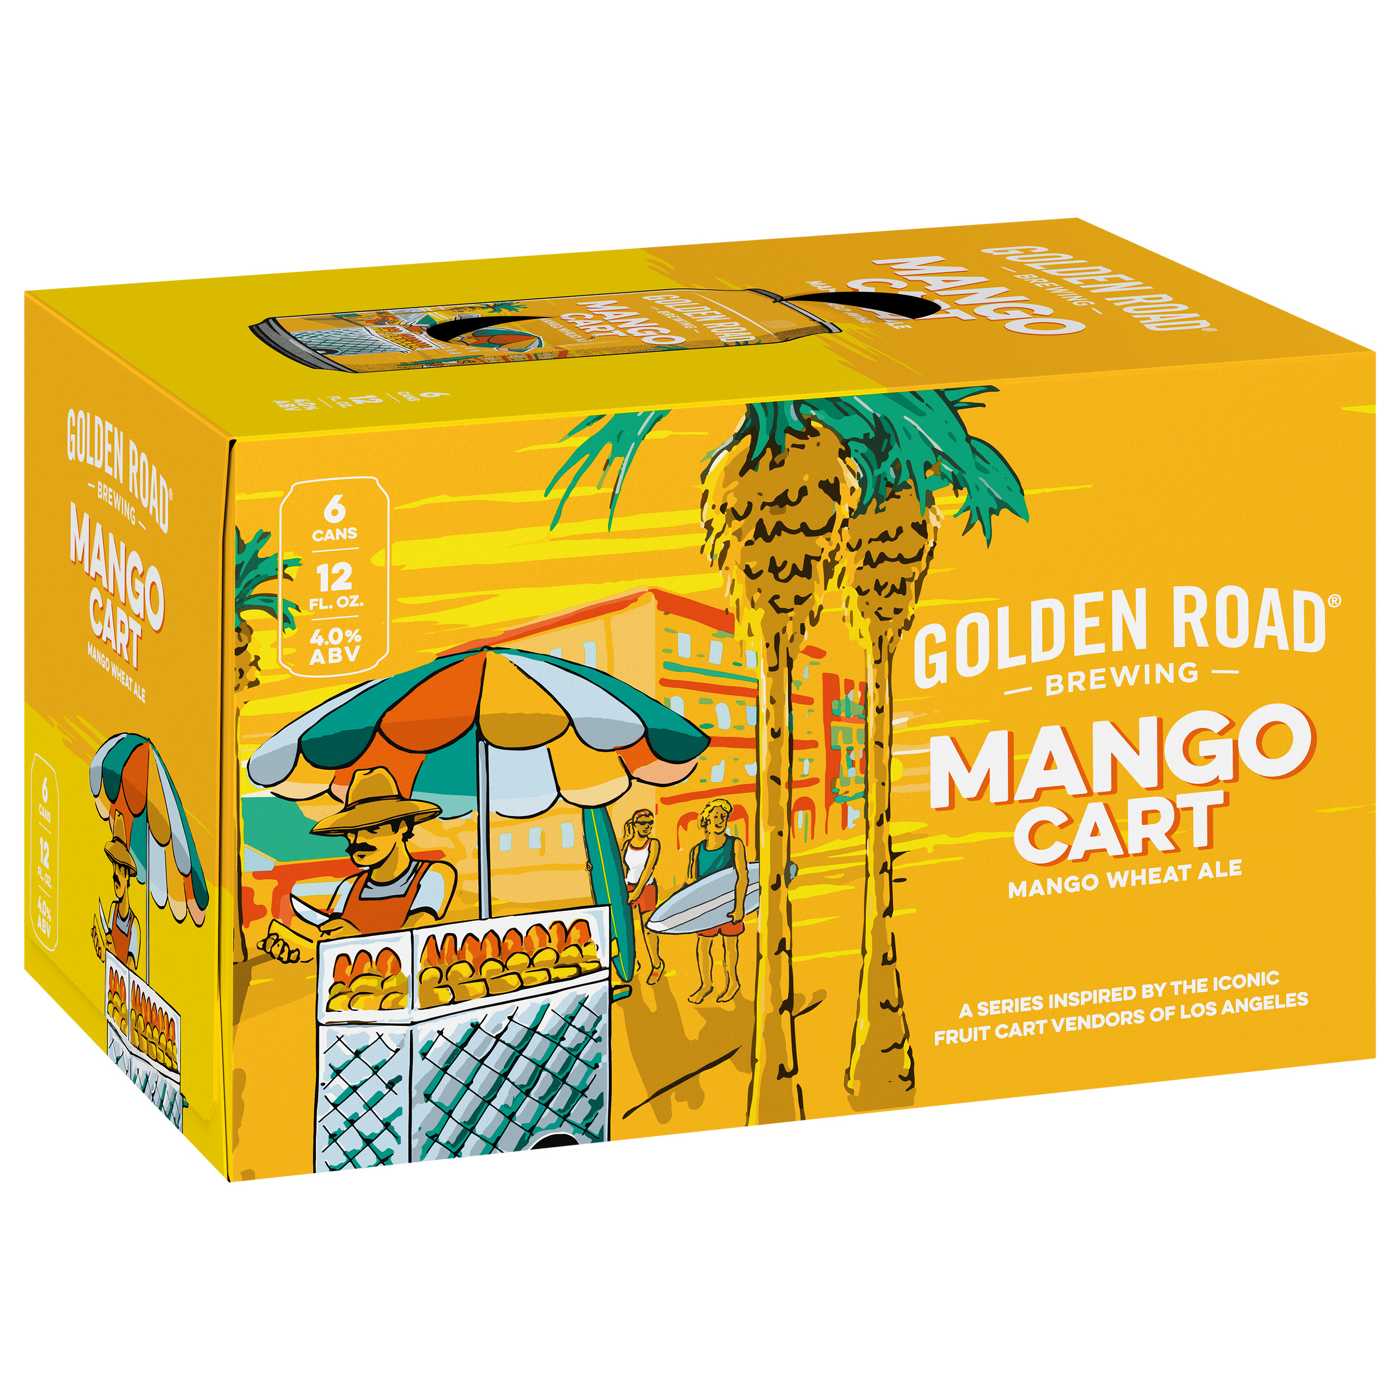 Golden Road Mango Cart Wheat Ale Beer 6 pk Cans; image 1 of 2